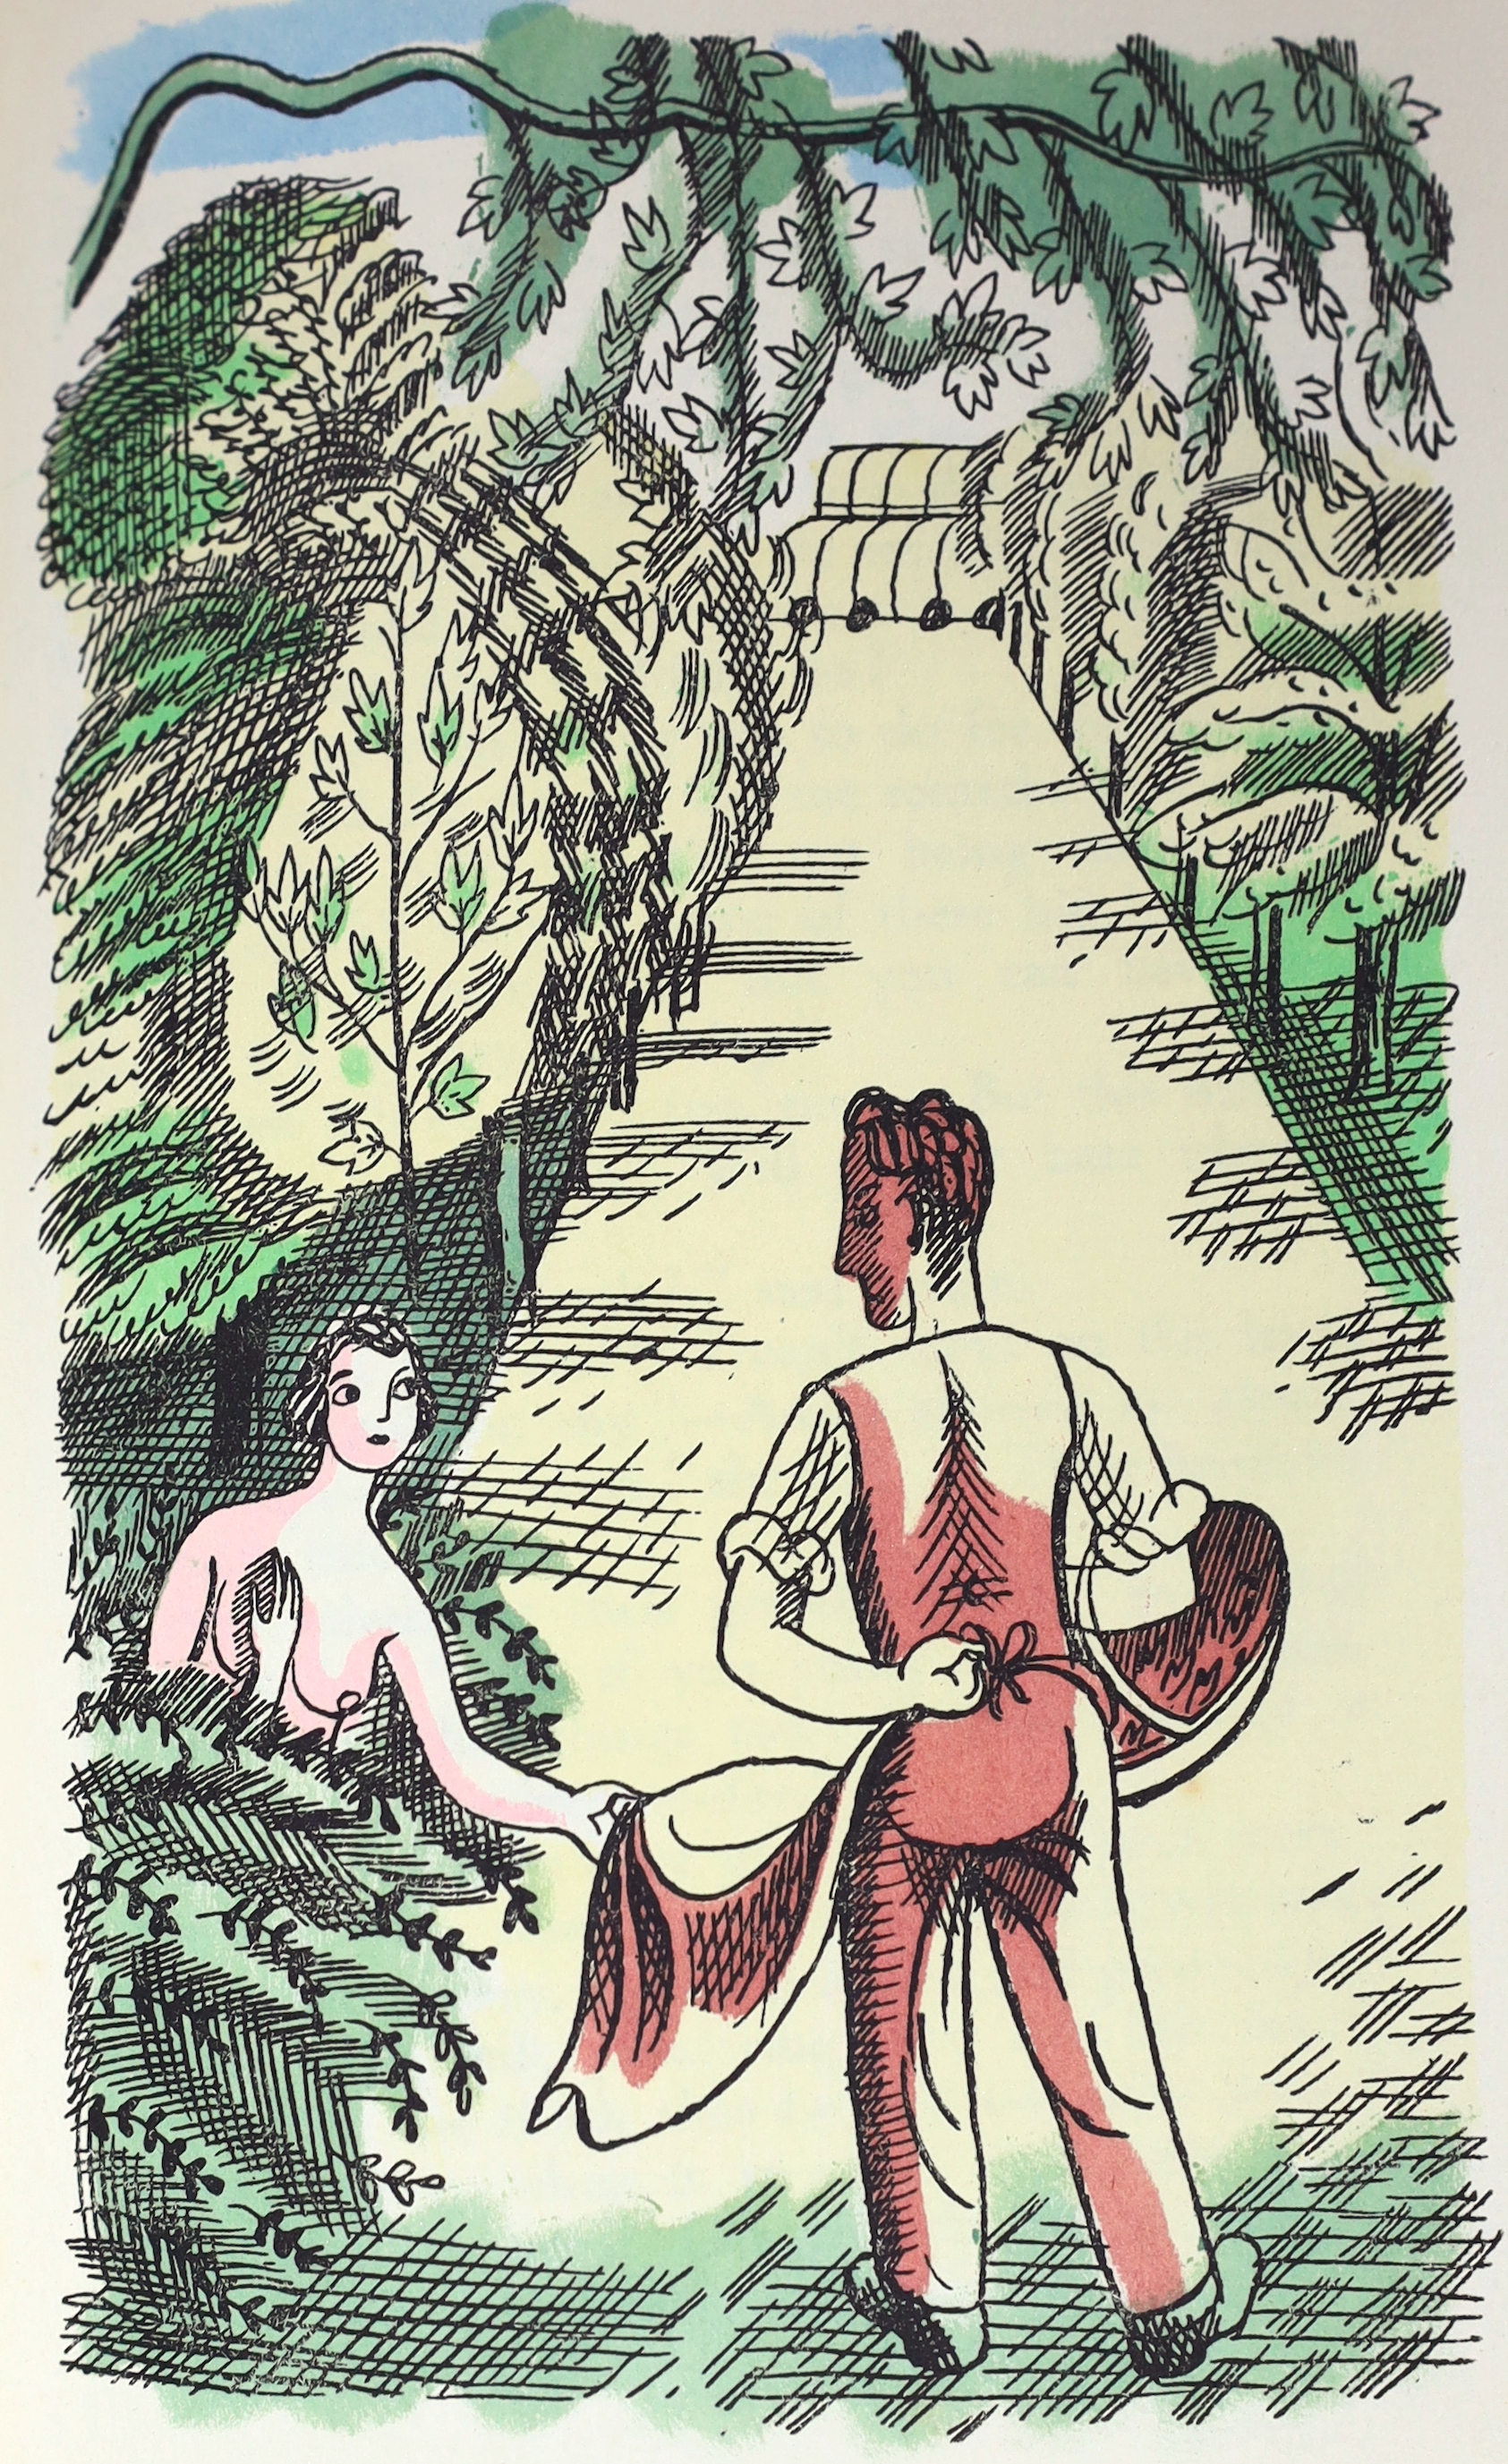 Herring, Robert - Adam and Evelyn at Kew, or, Revolt in the Gardens, one of 1000, illustrated by Edward Bawden, with 13 pochoir plates, 6 illustrations in the text and the endpapers decorated with aerial views of Kew Gar